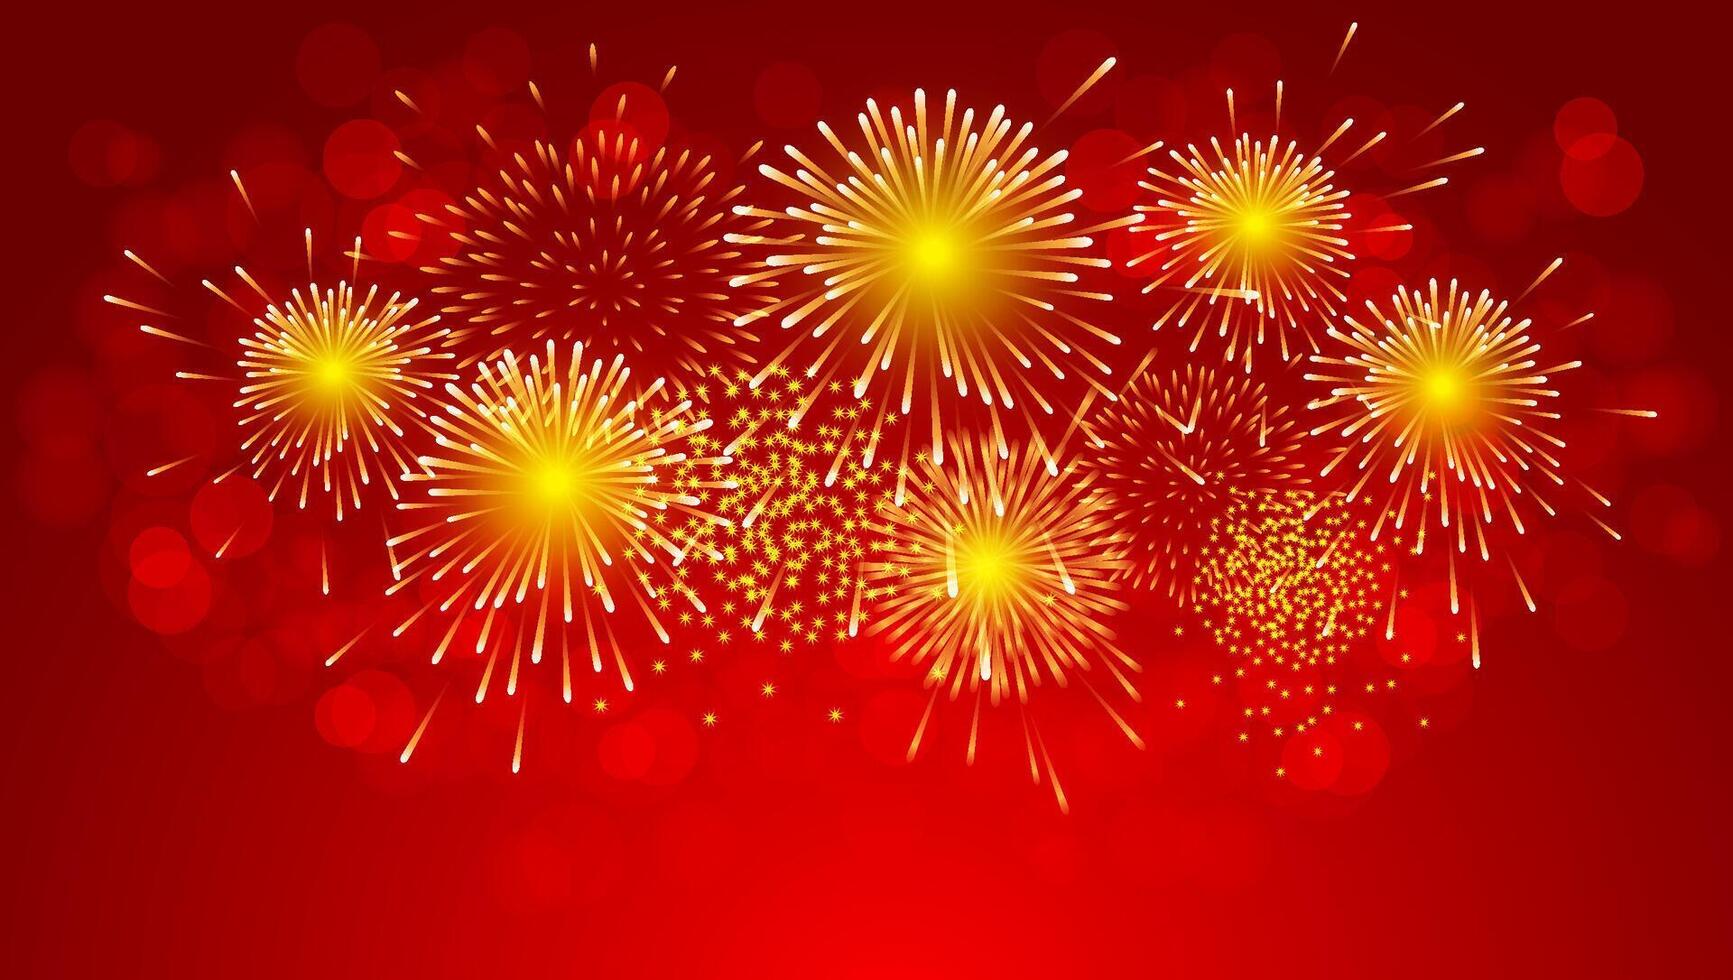 Gold fireworks celebration on red background for Chinese new year vector